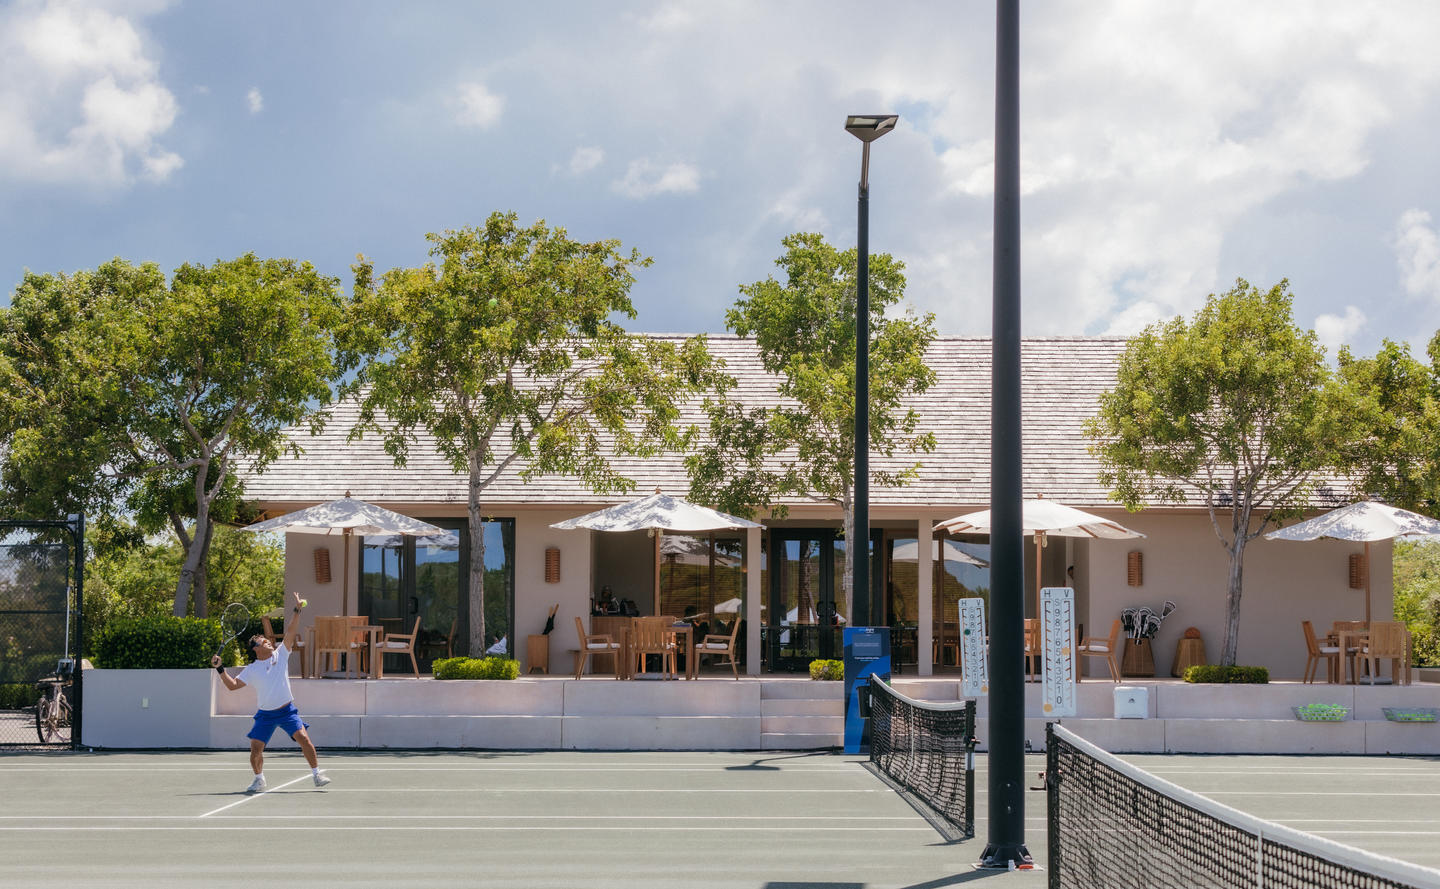 Former tennis pro Tommy Haas recently did a residency at Amanyara. He talks travel, surviving injury, and joining the ownership team of the San Diego StingRays padel tennis team.